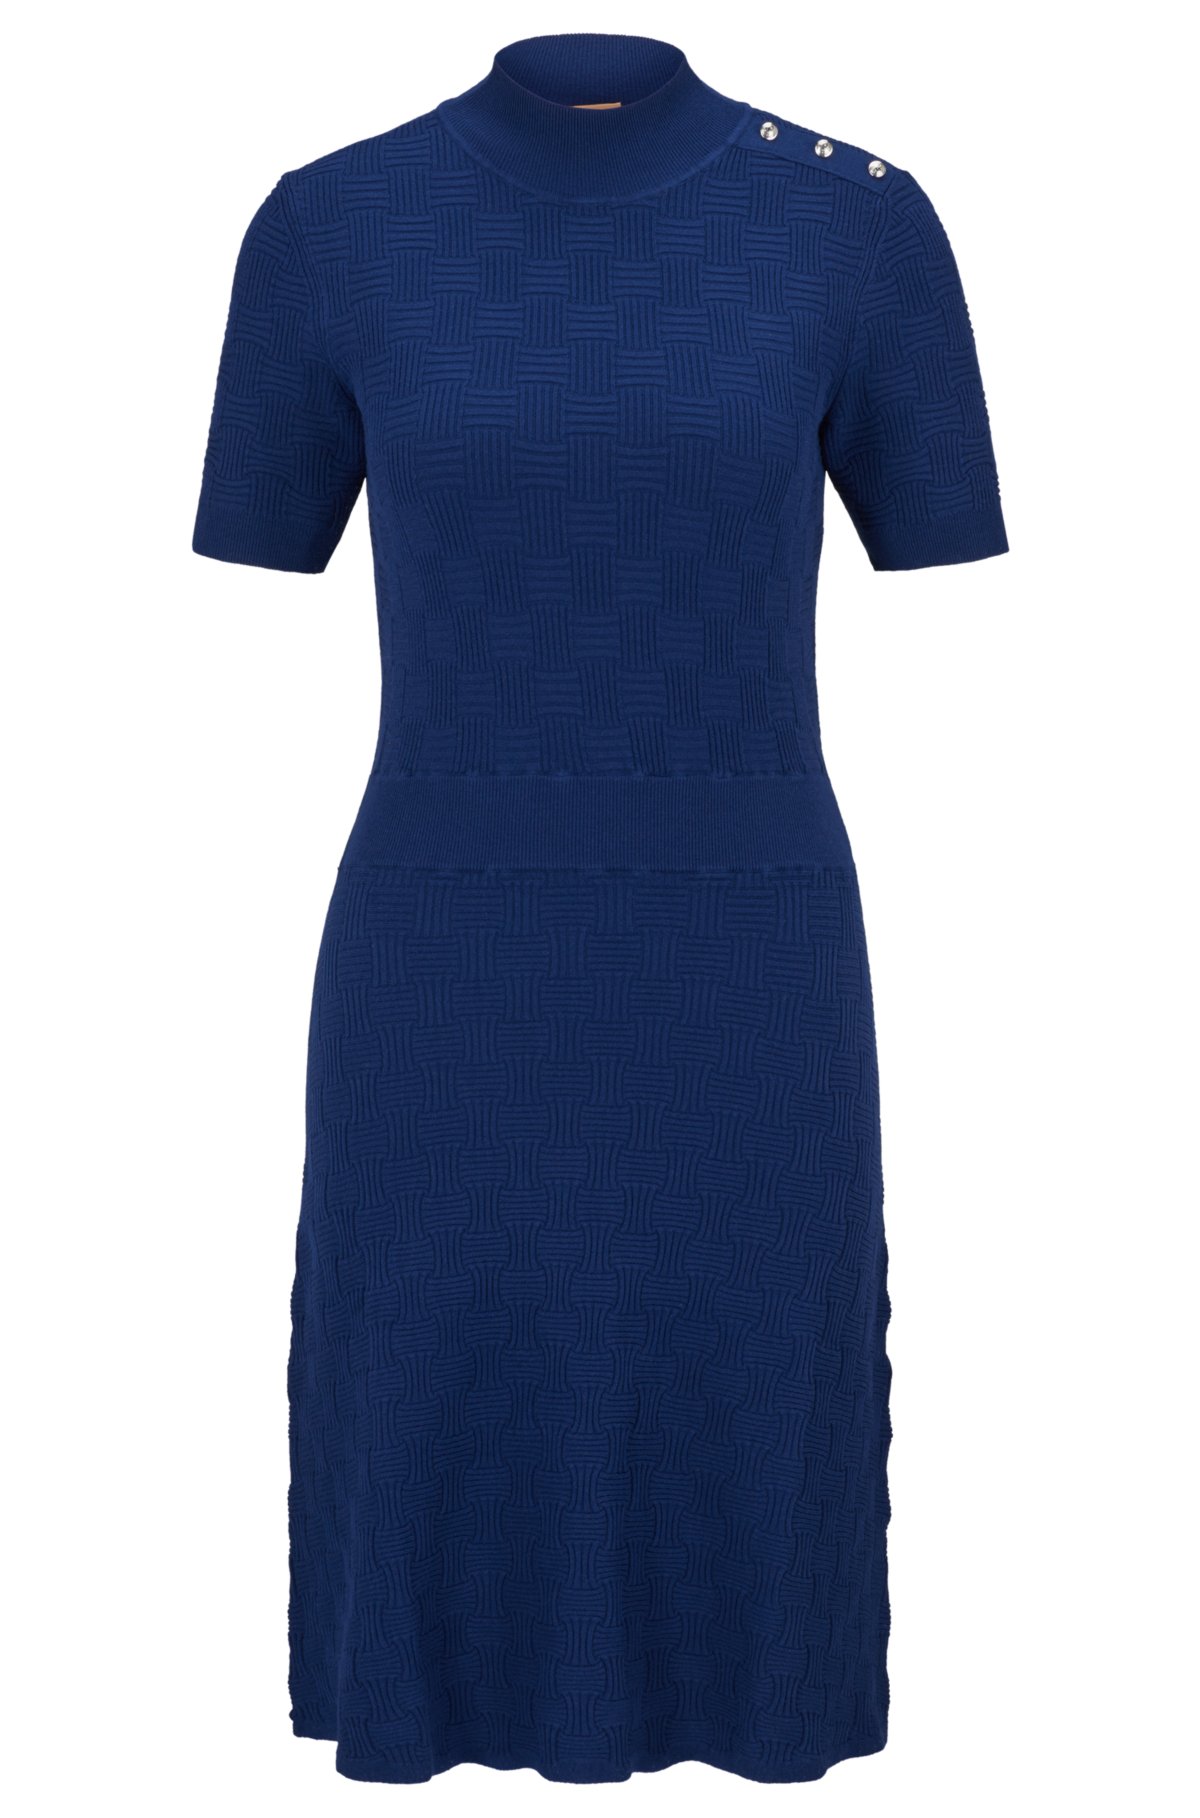 BOSS - Short-sleeved dress with knitted structure